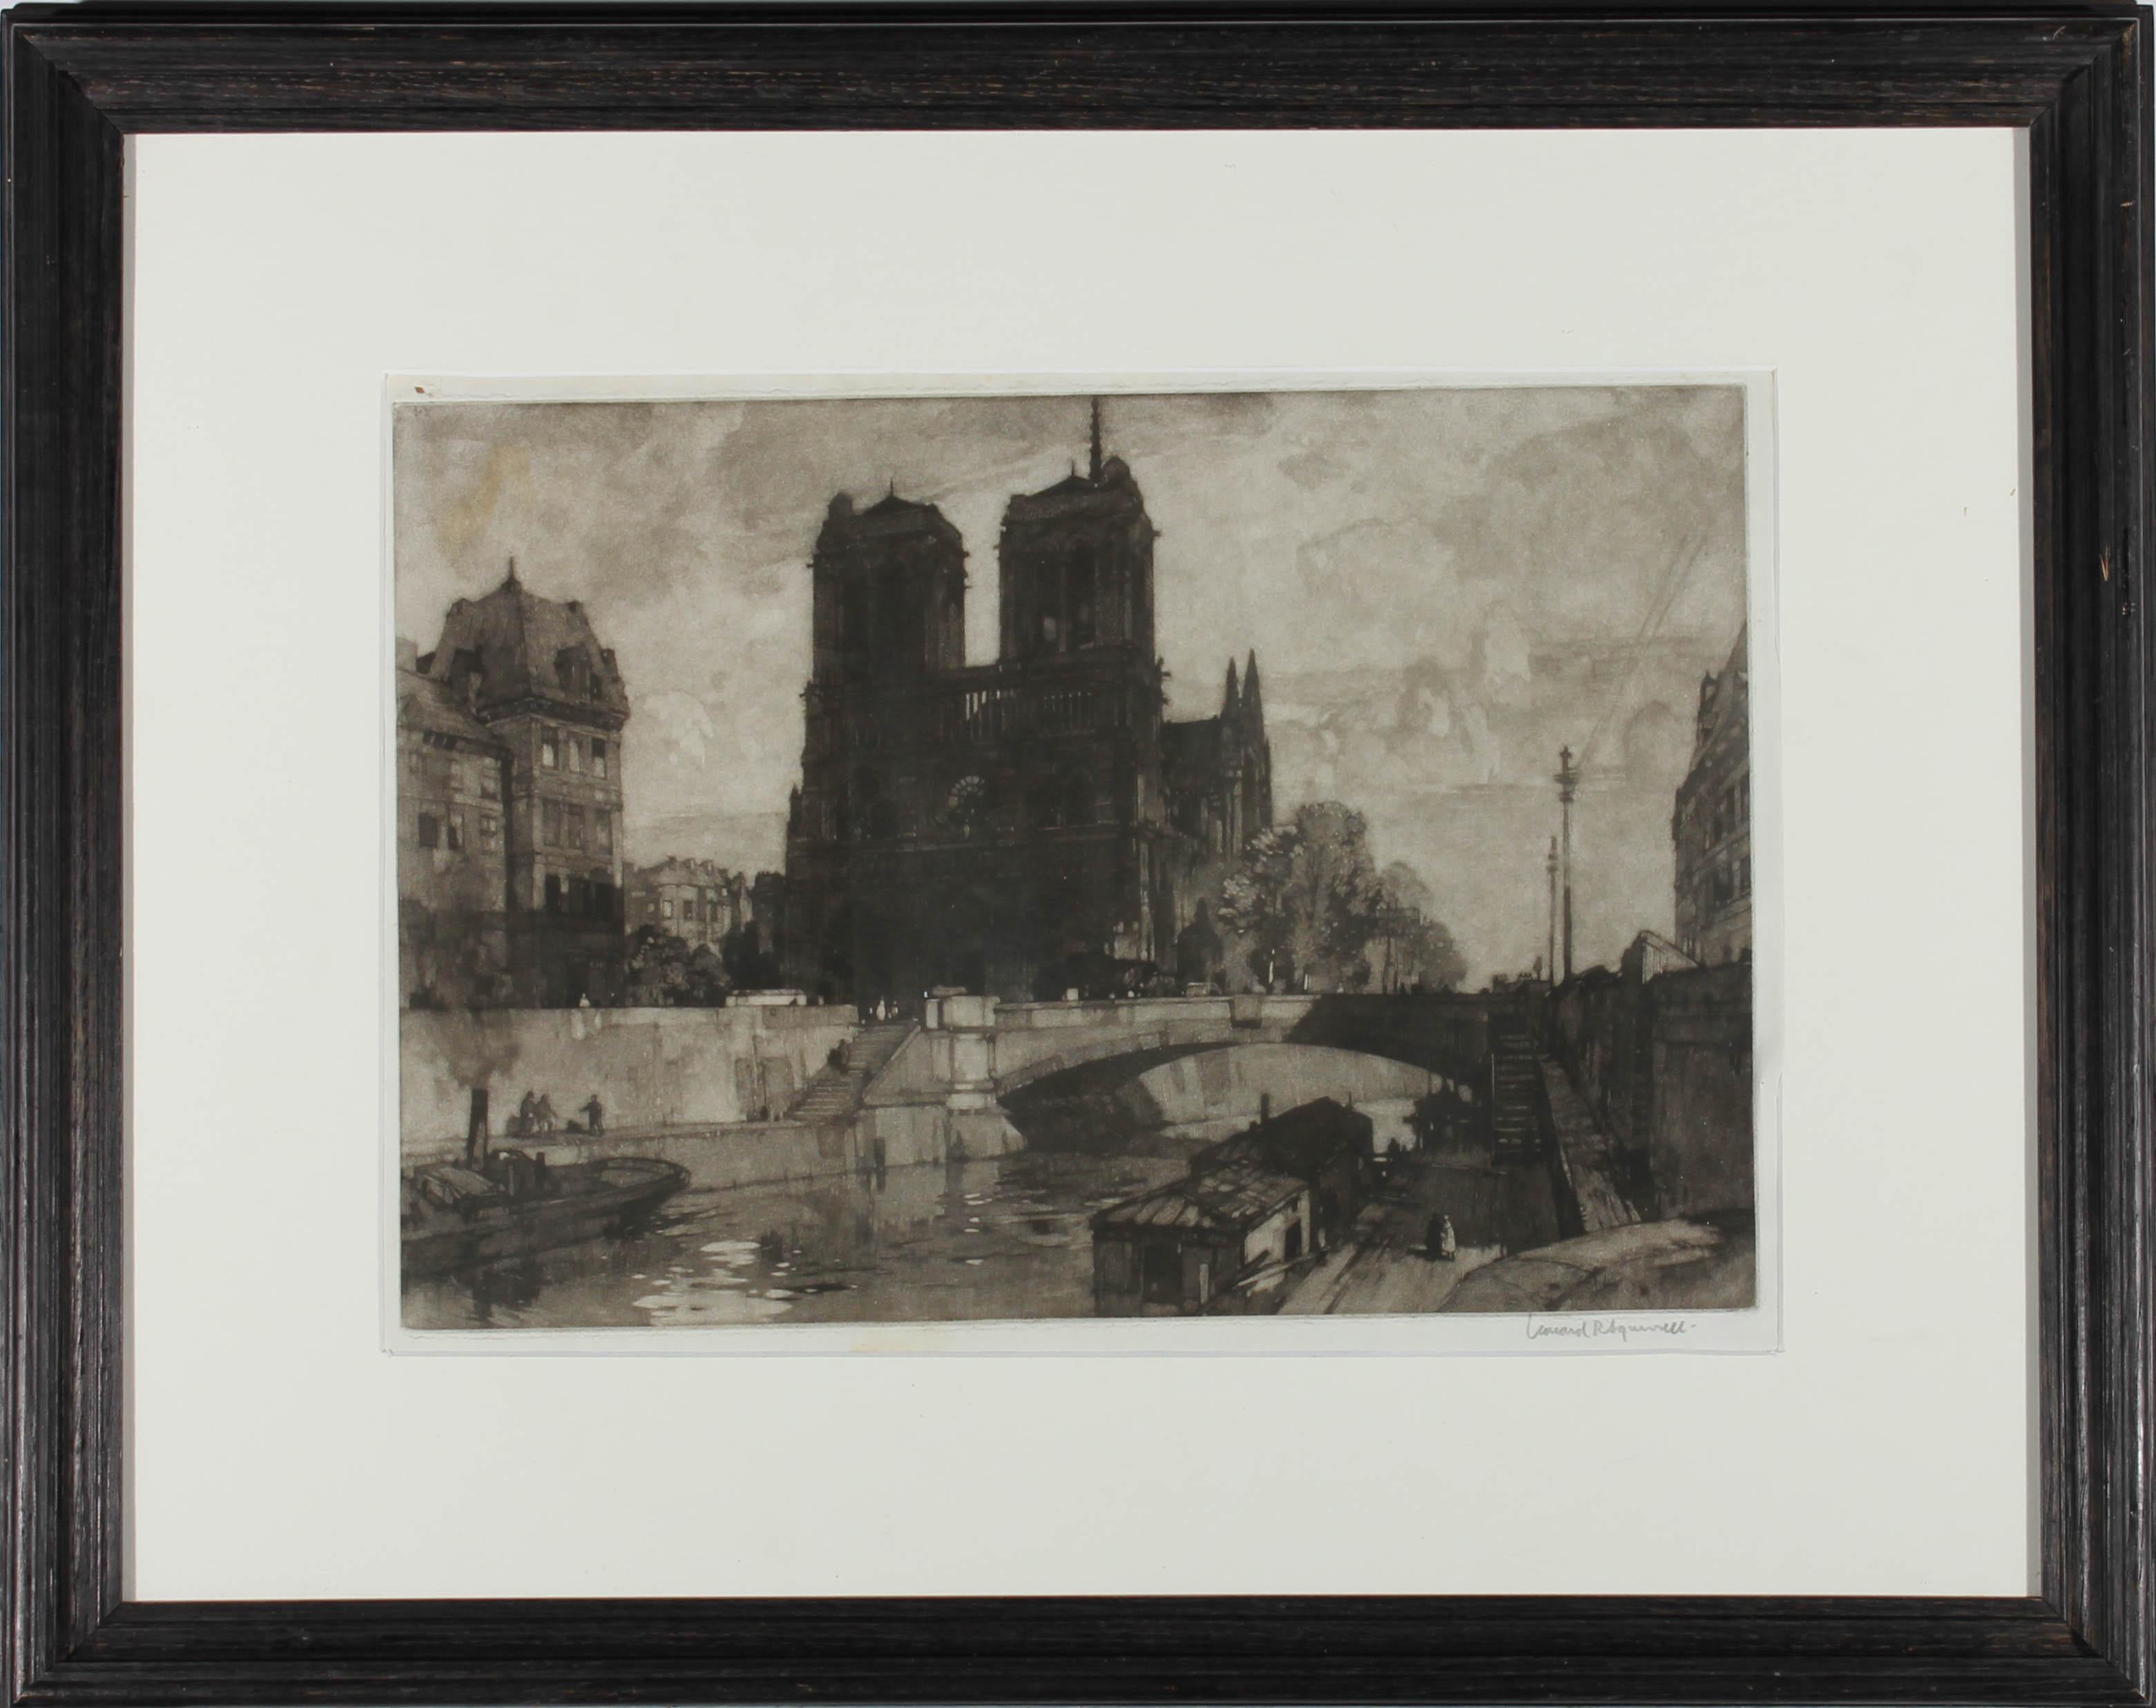 This charming mezzotint depicts the façade of Notre Dame in Paris. Signed in graphite below the plate lines. On paper.
